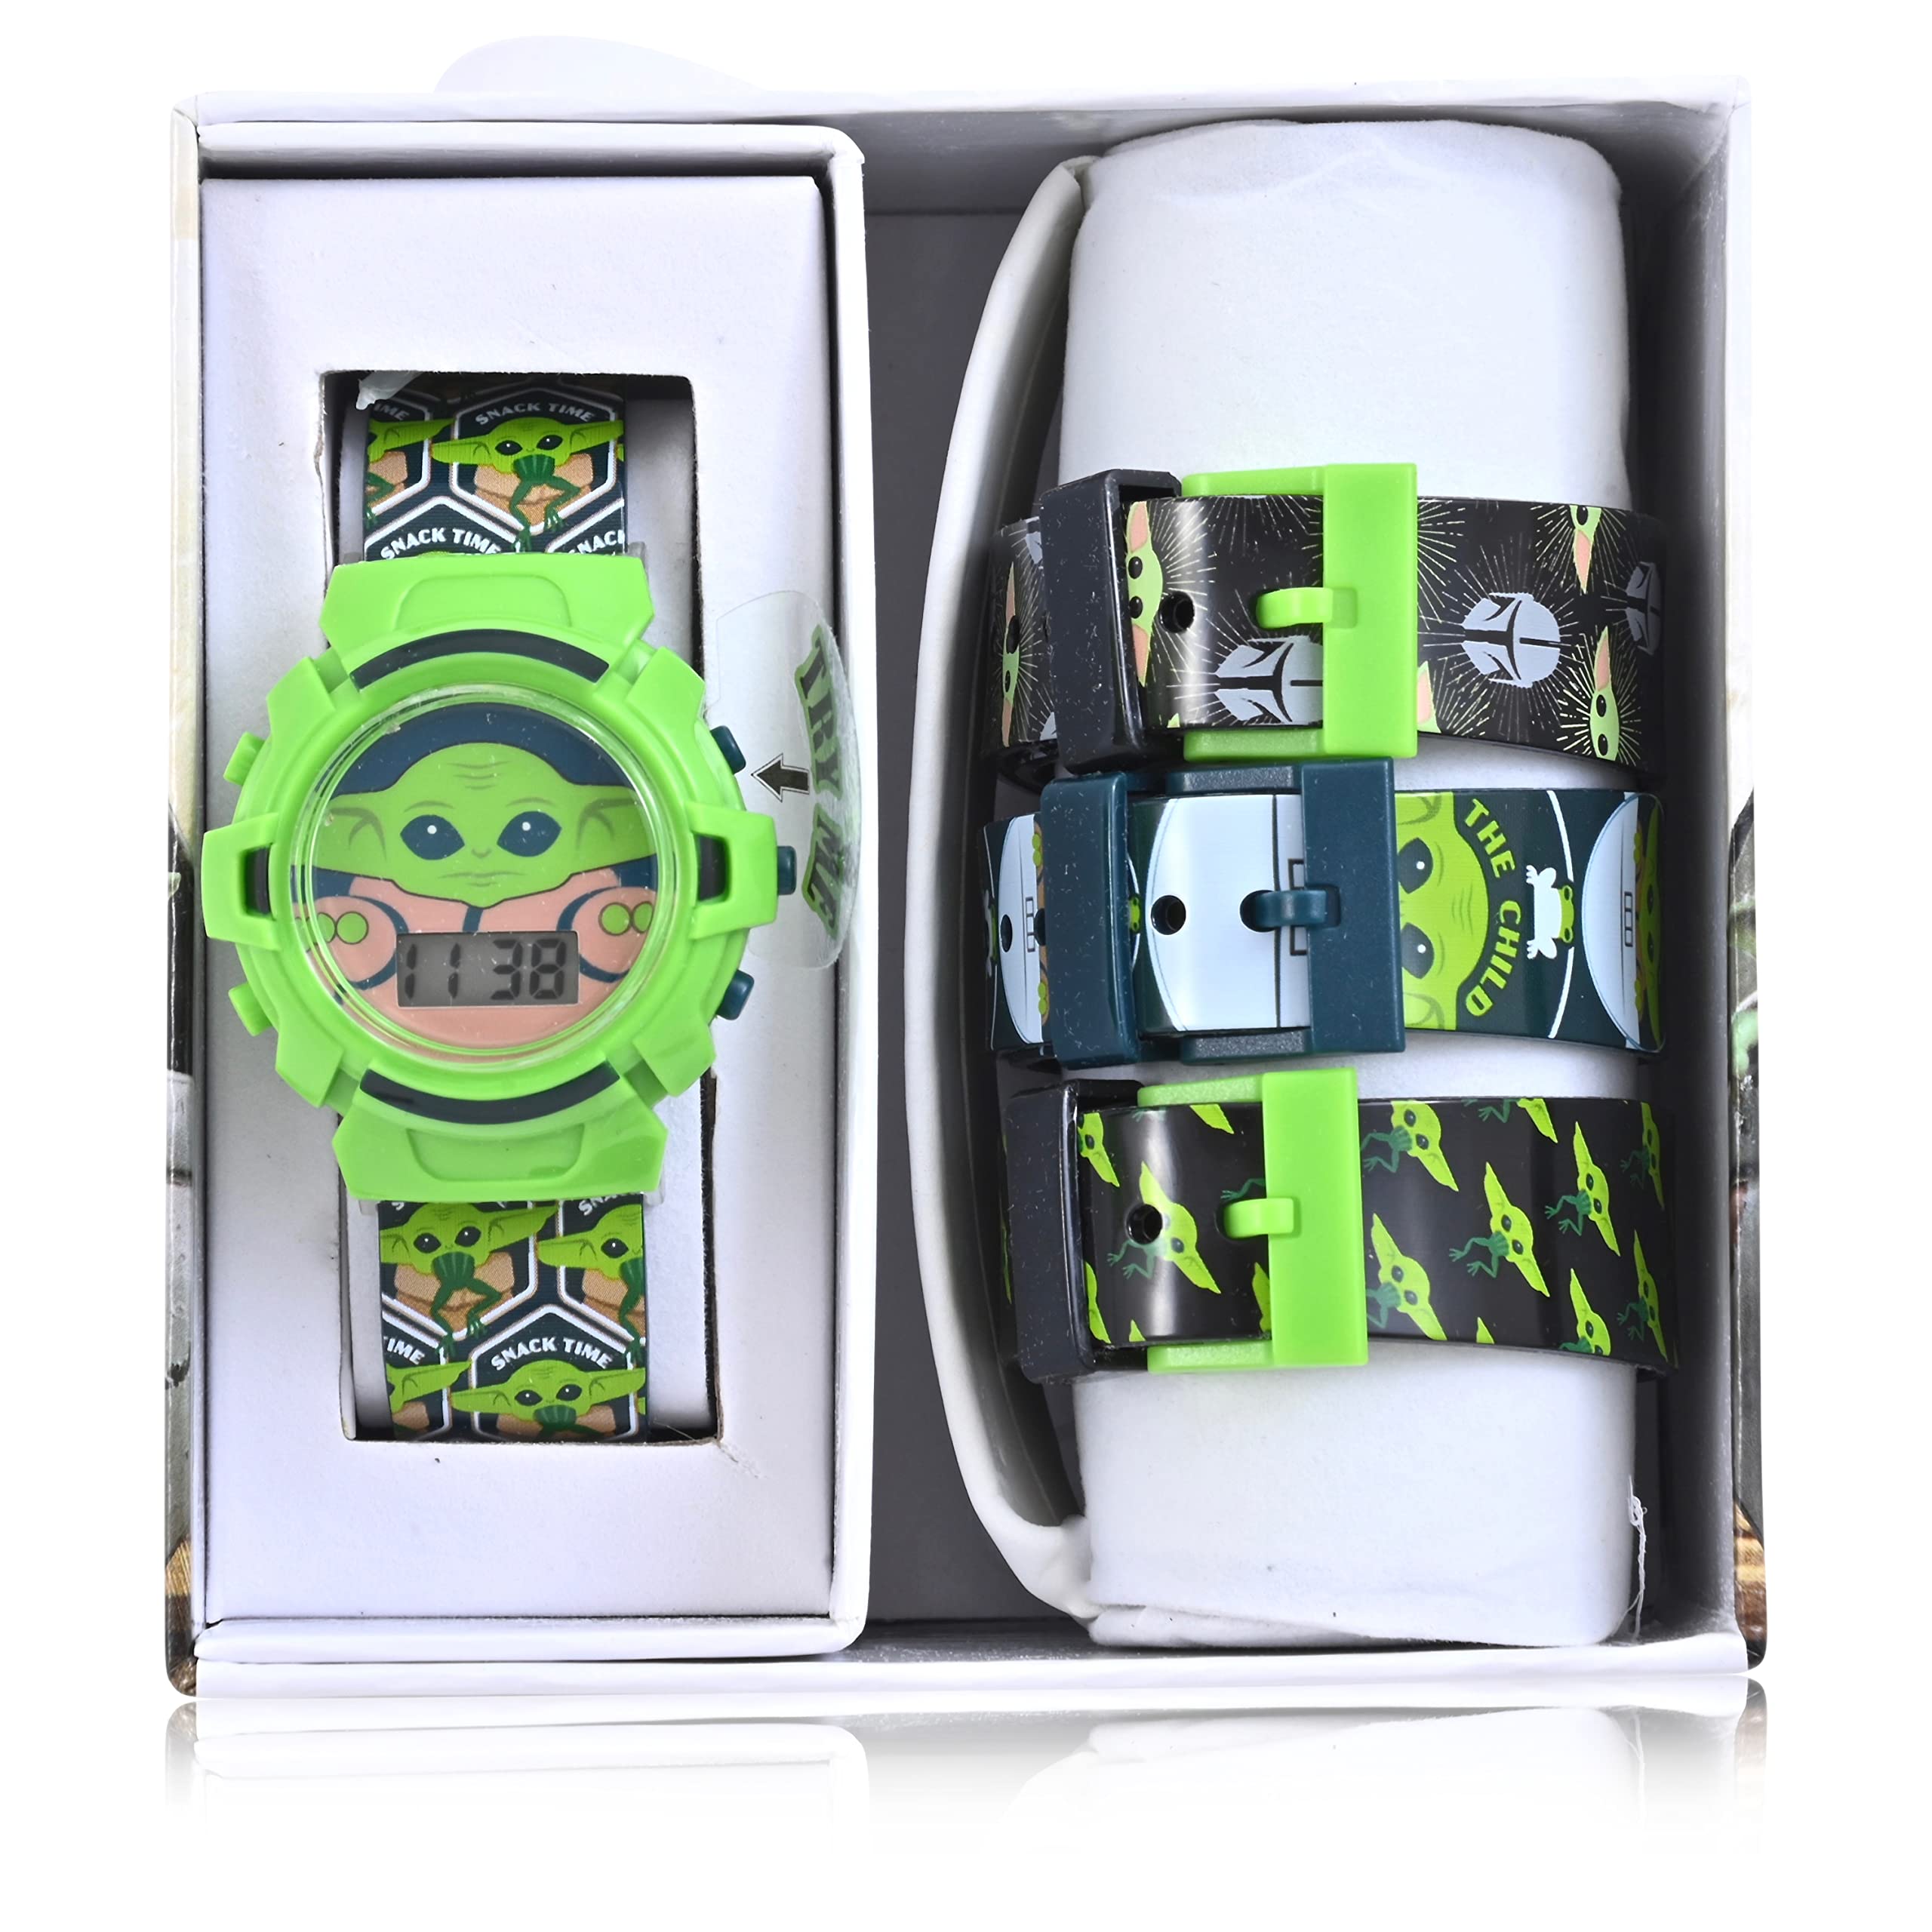 Lucasfilm Star Wars Baby Yoda Kids Digital Watch - LED Flashing Light, LCD Watch Display, 4 in 1 interchangeable Plastic Straps, Kids, Girls And Boys Watch, in Multi Color Bands (Model: MNL40007AZ)